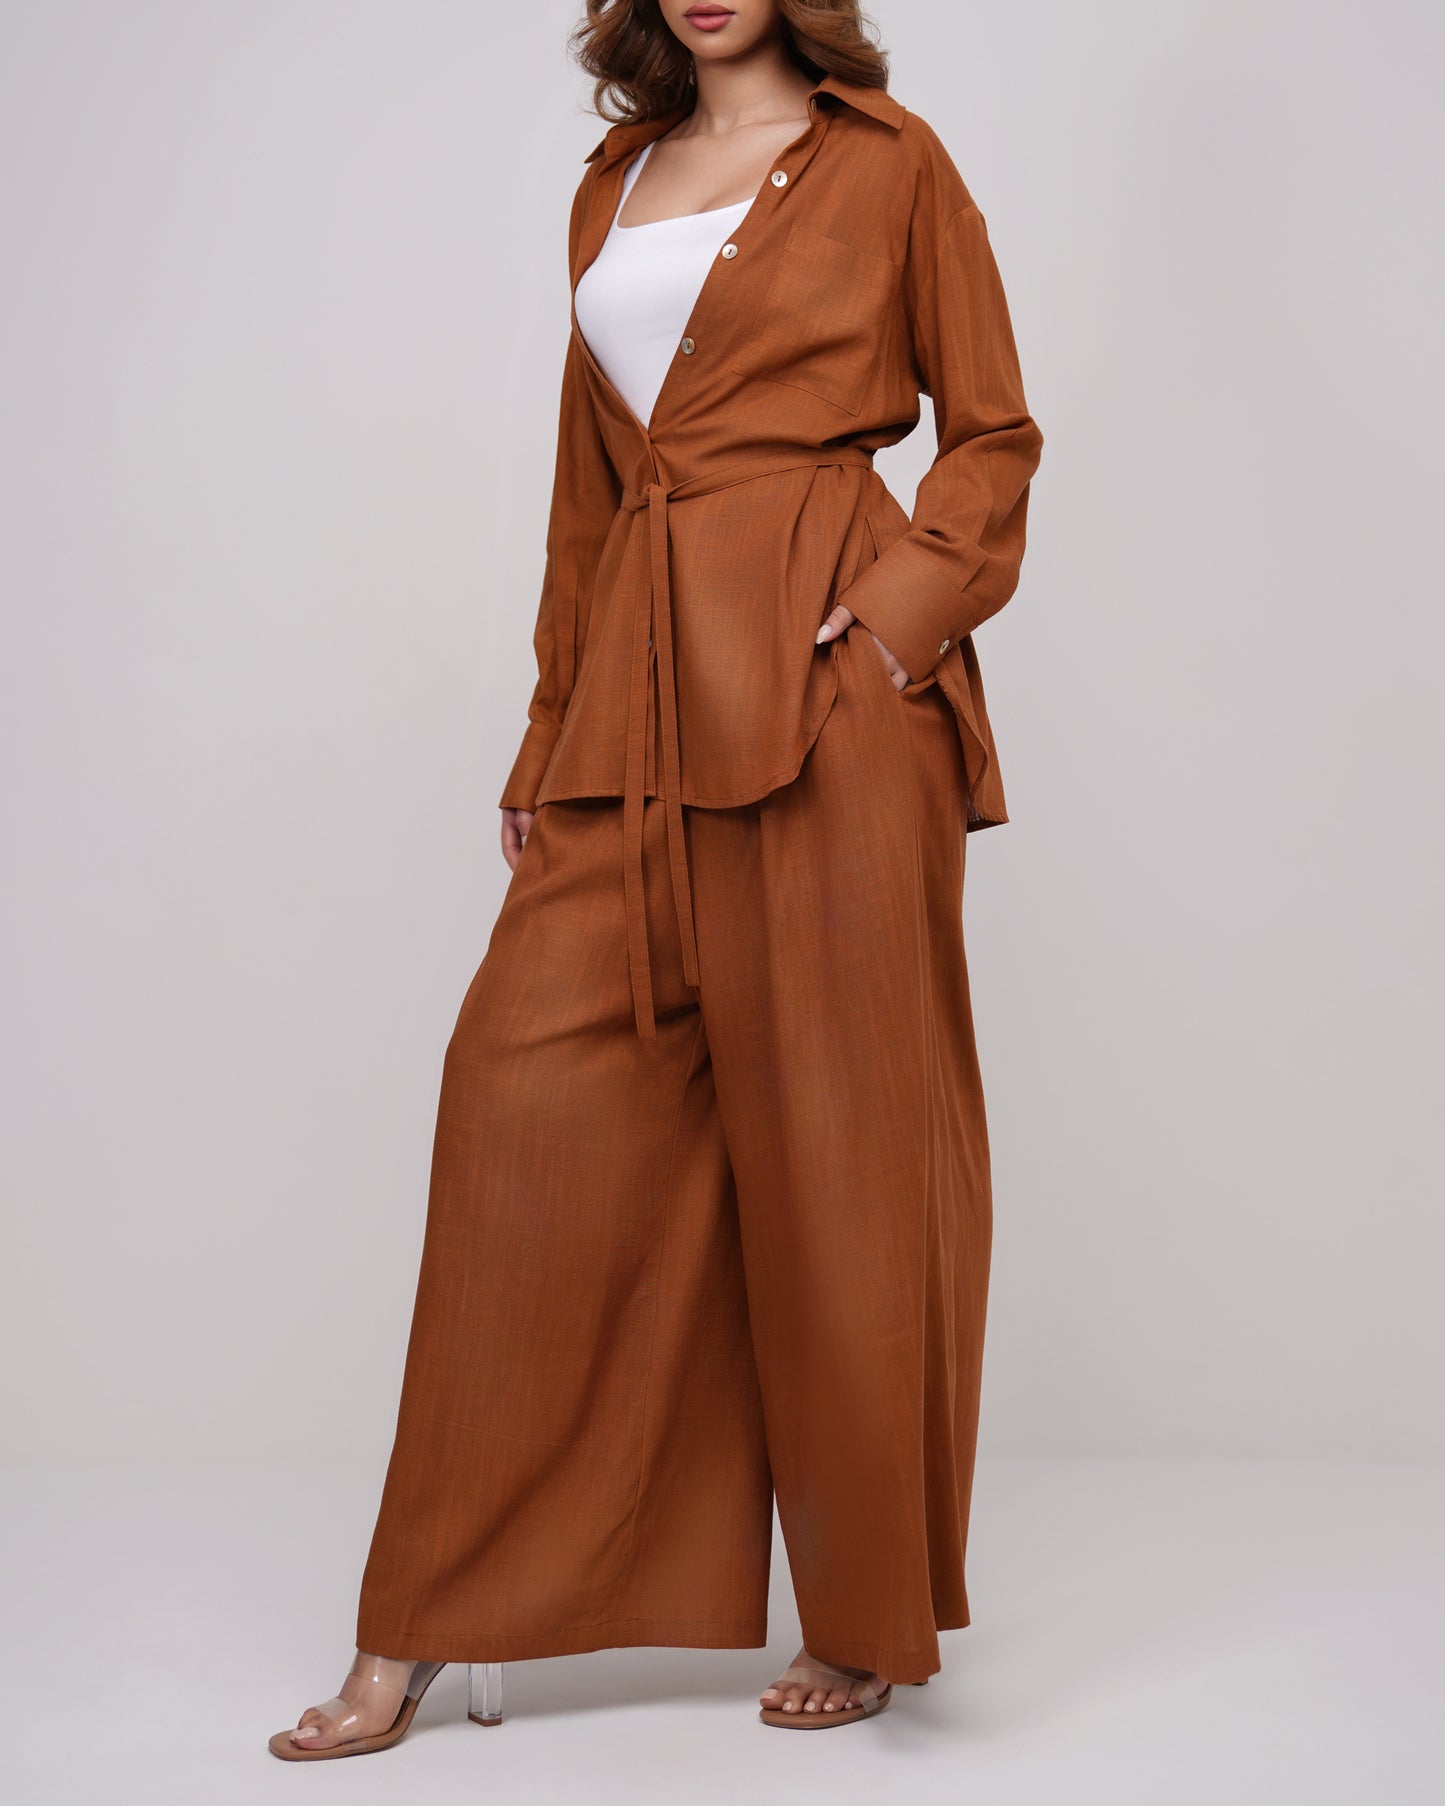 Chocolate buttons up shirt with culottes trousers